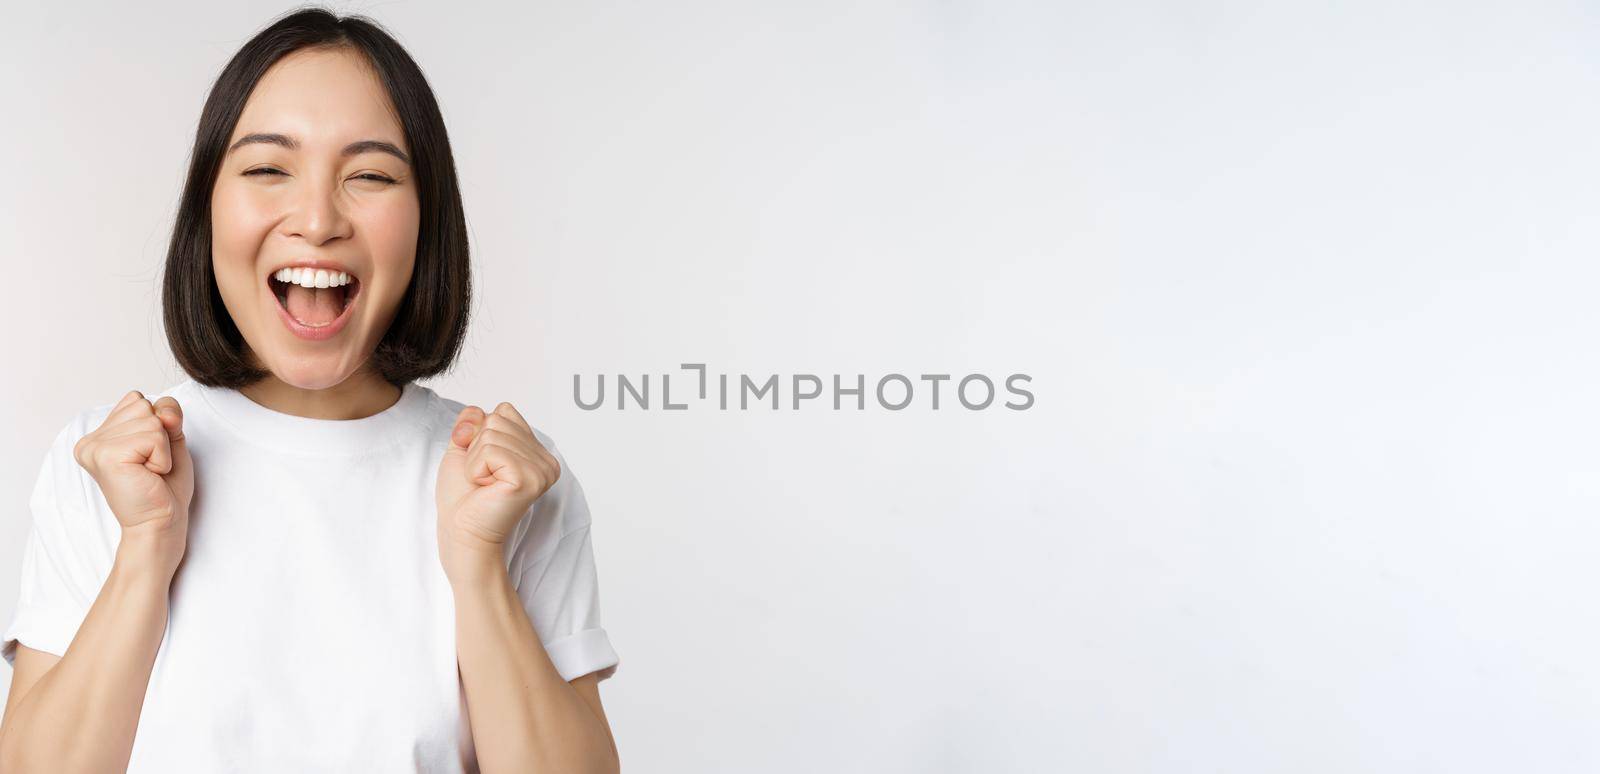 Portrait of enthusiastic asian woman winning, celebrating and triumphing, raising hands up, achieve goal or success, standing over white background.